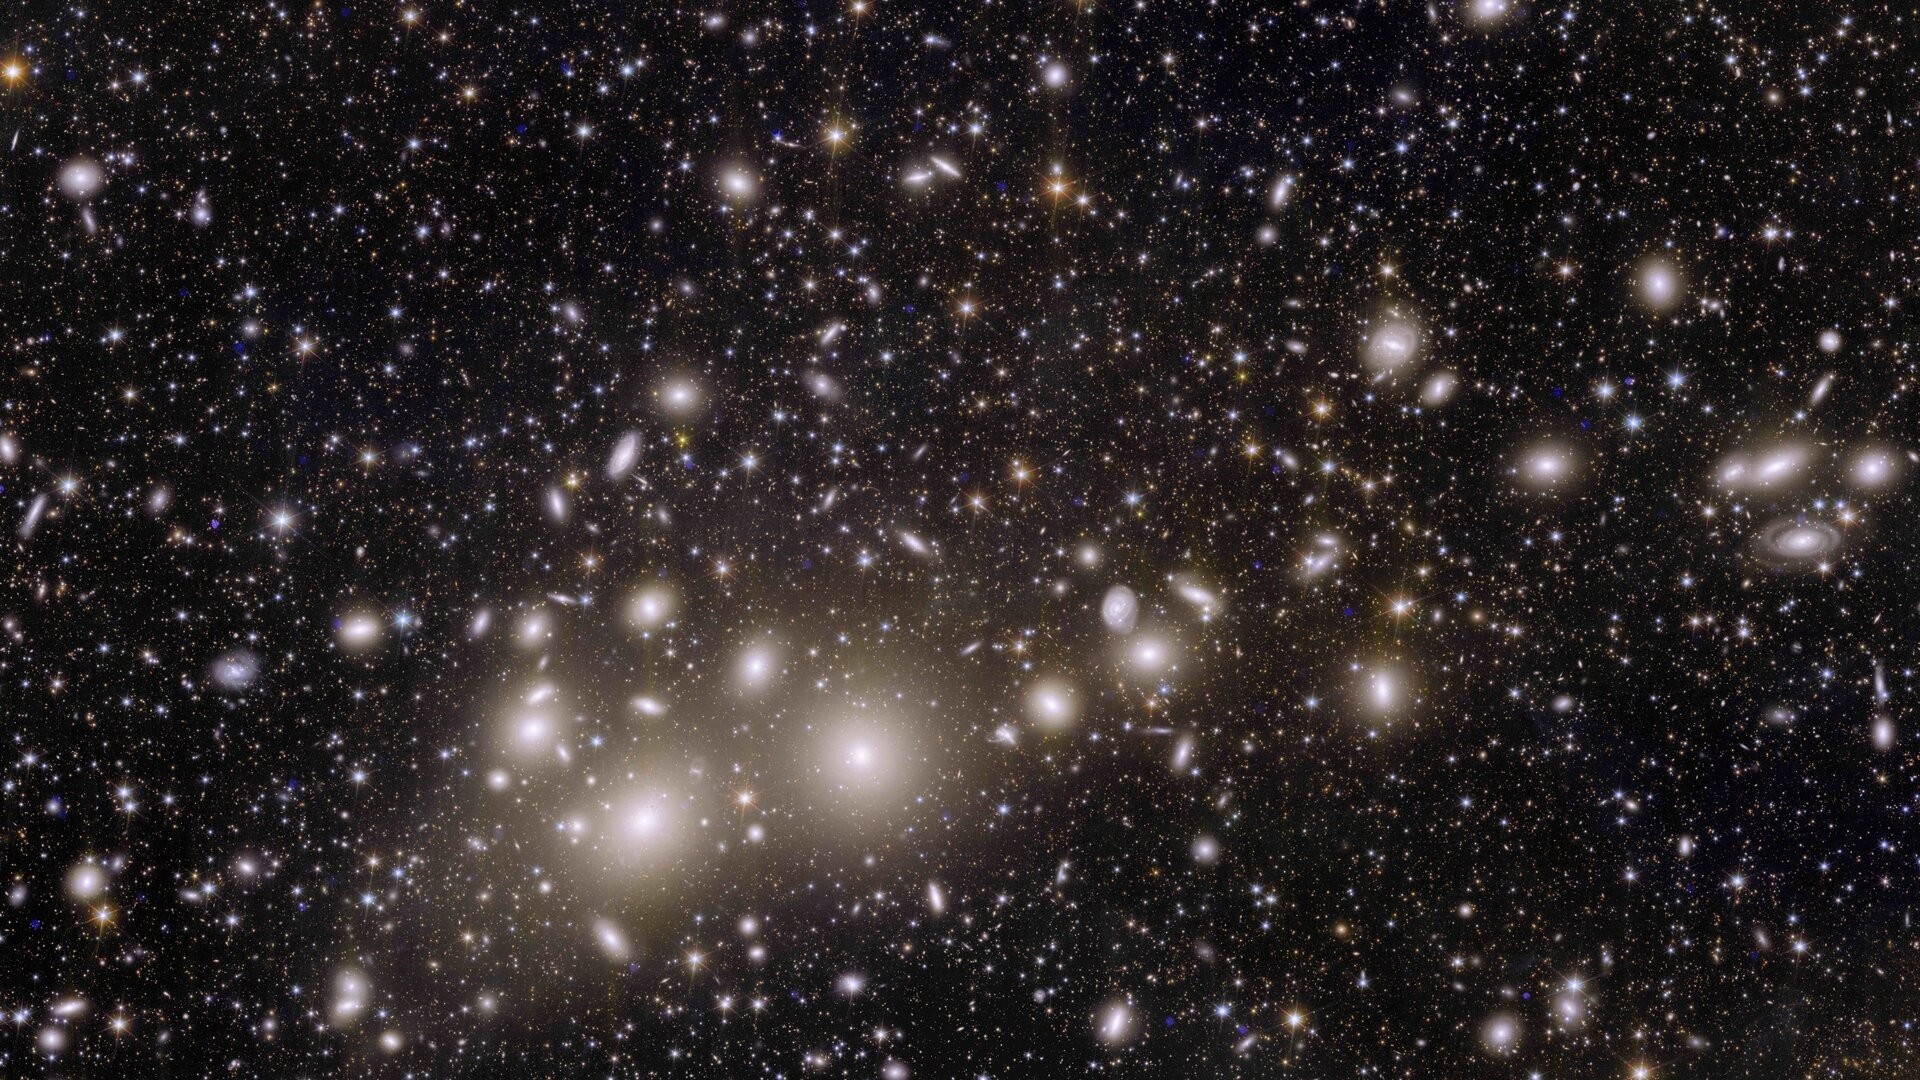 euclid-s-view-of-the-perseus-cluster-of-galaxies-pillars.jpg